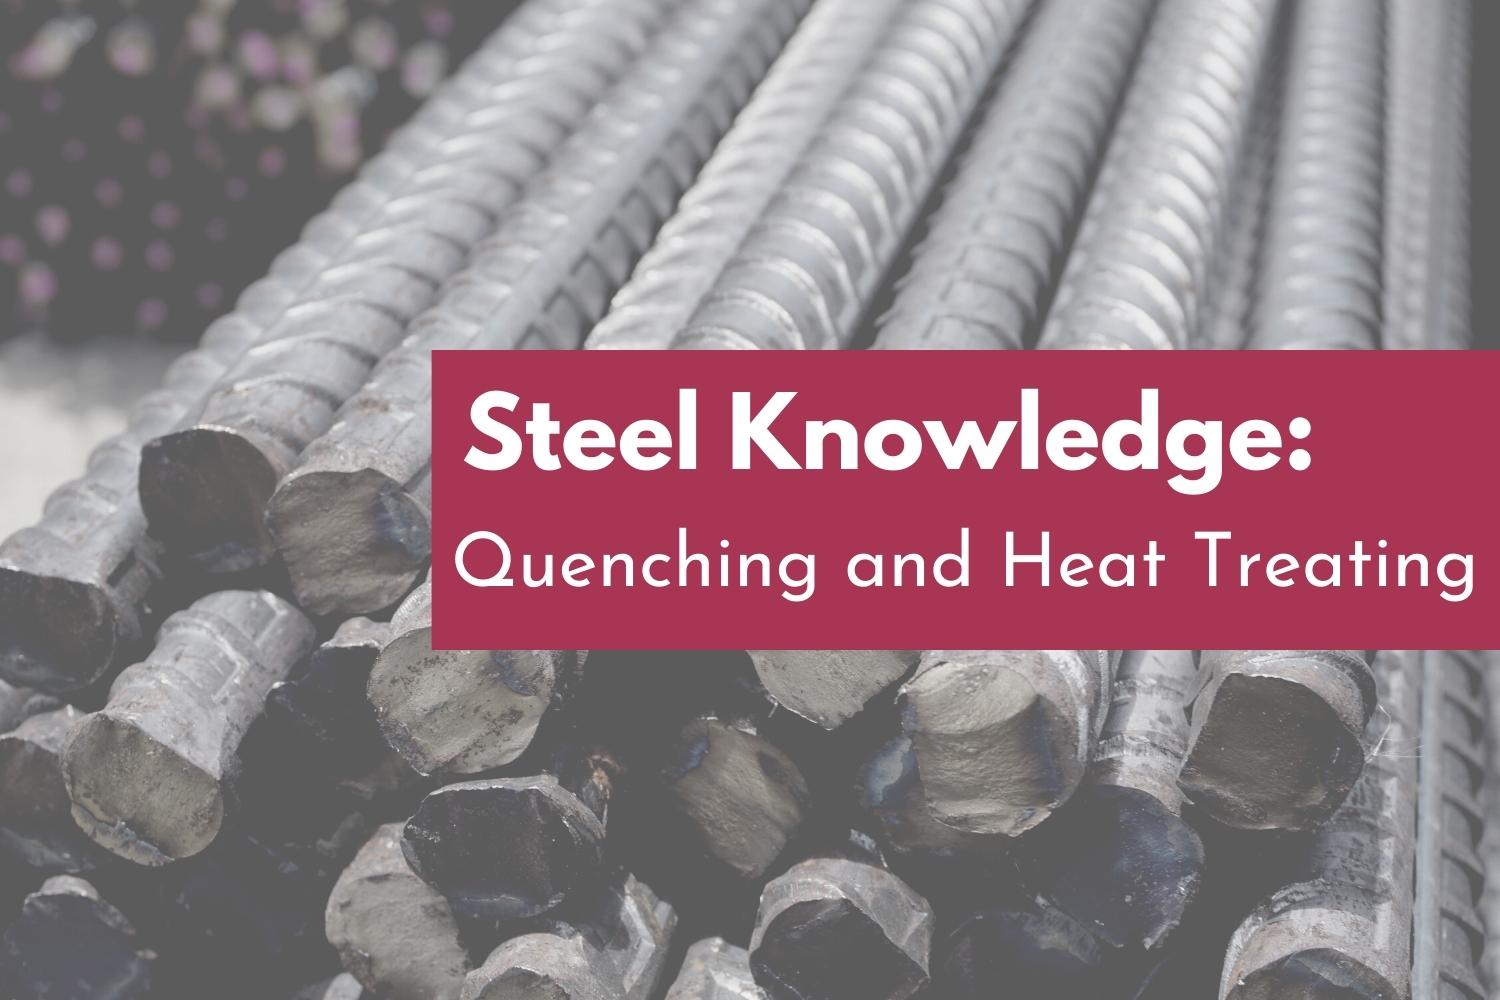 Heat Treating and Quenching: How Does Heat Treatment Affect Final Quality?